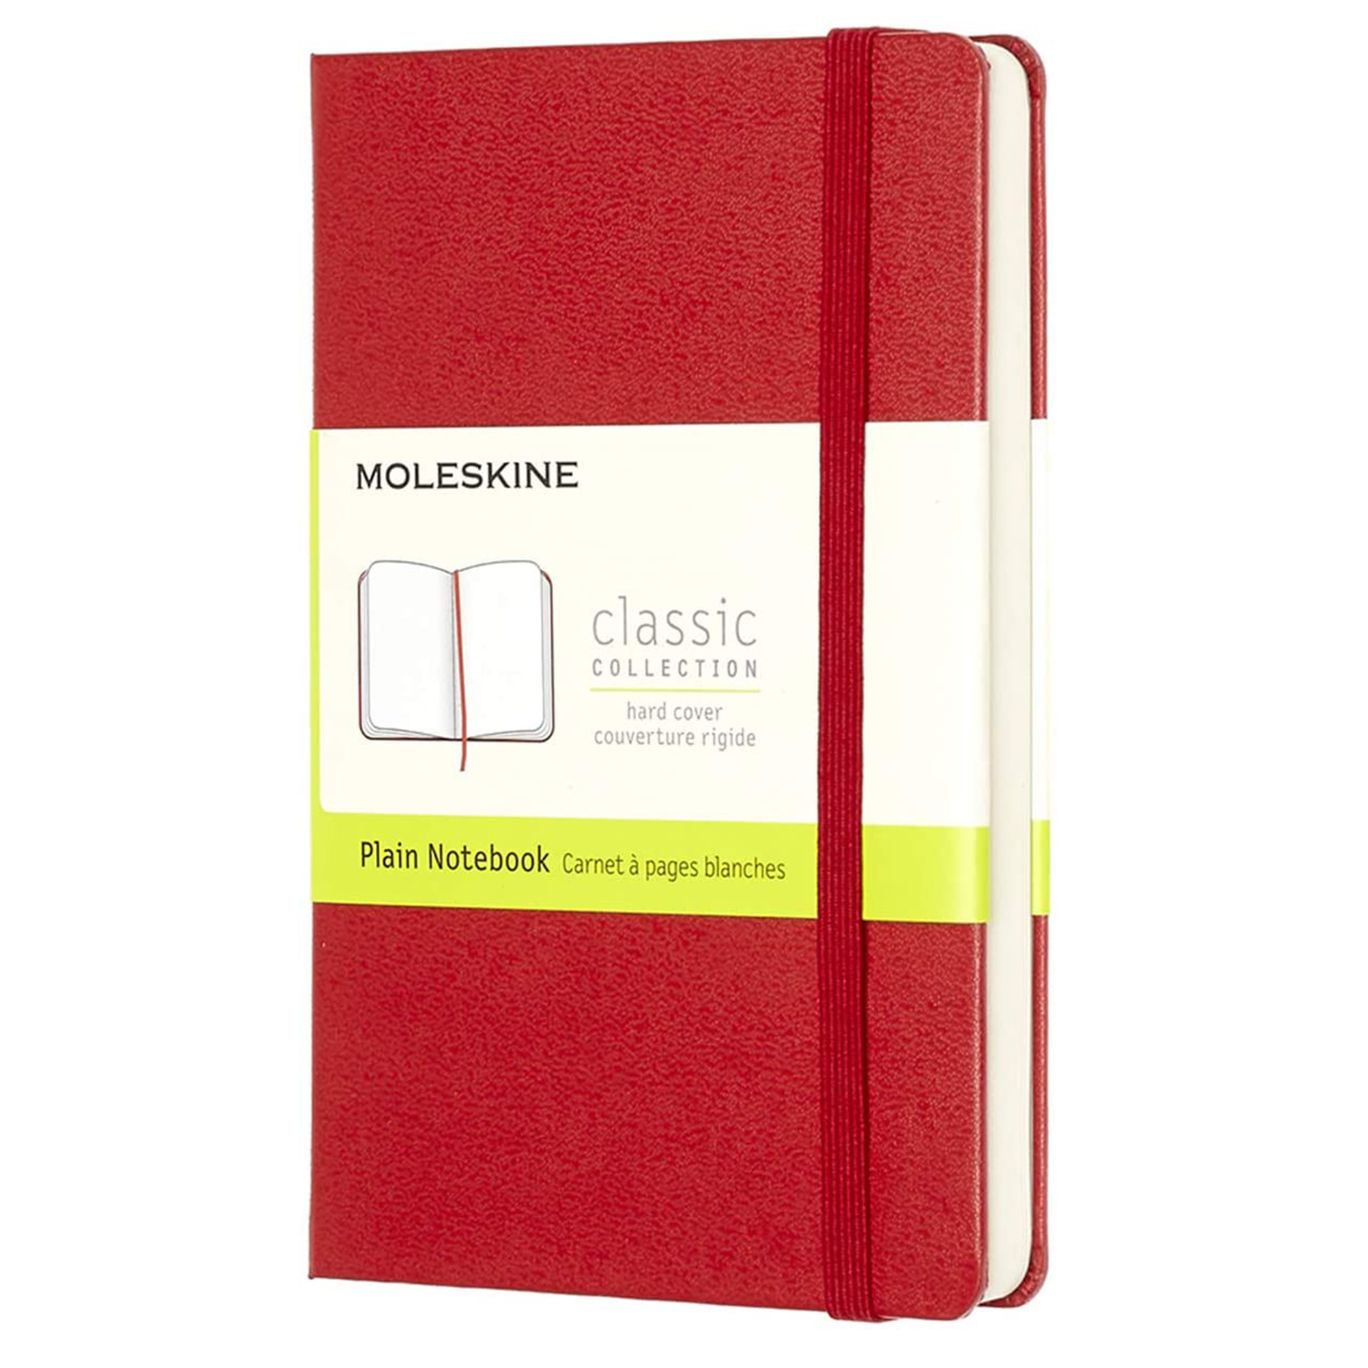 Moleskine Classic Notebook, Large, Plain, Red, Hard Cover (5 x 8.25)